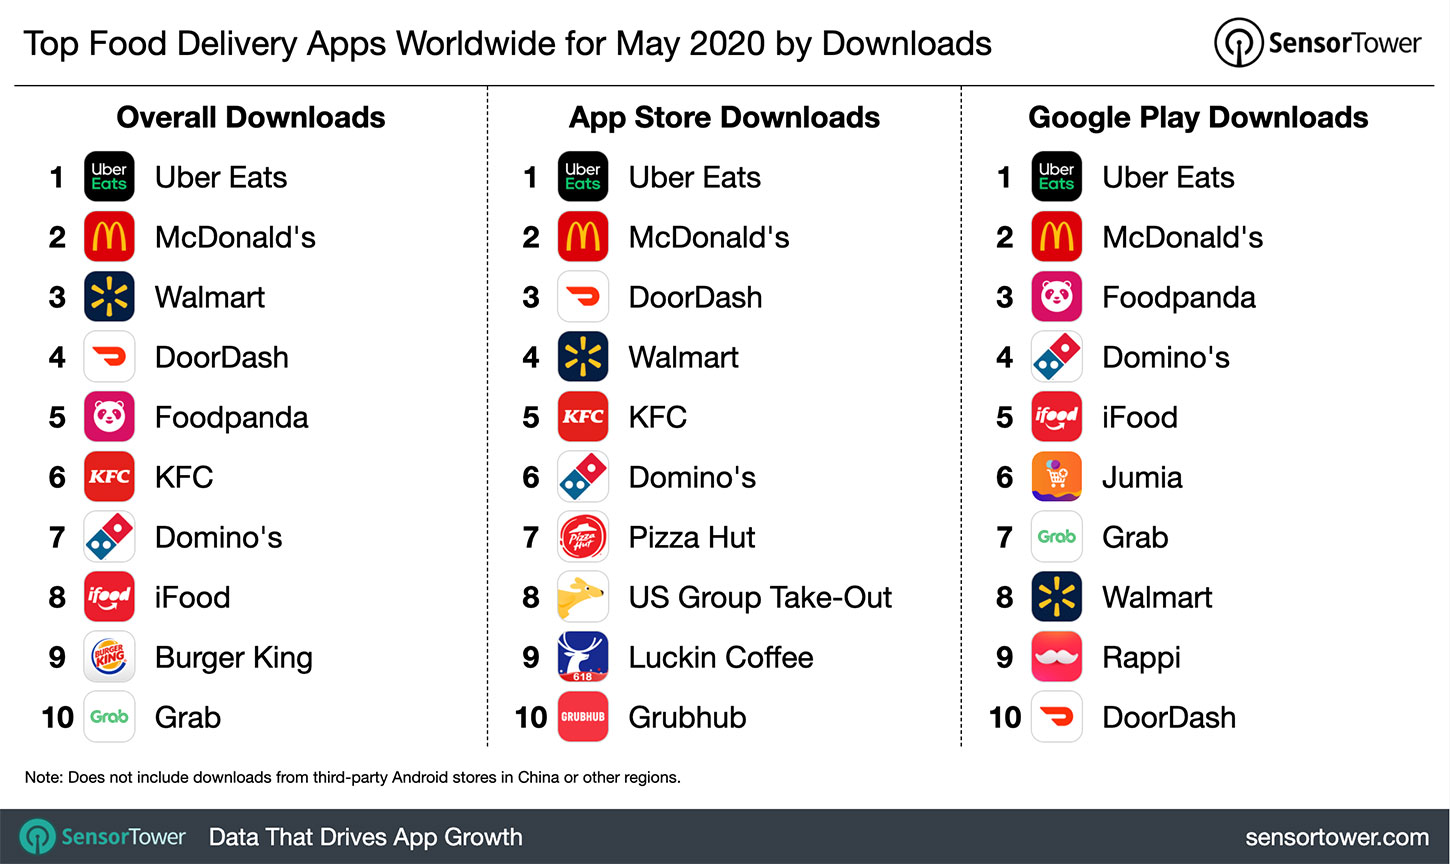 Top Food Delivery Apps Worldwide for May 2020 by Downloads